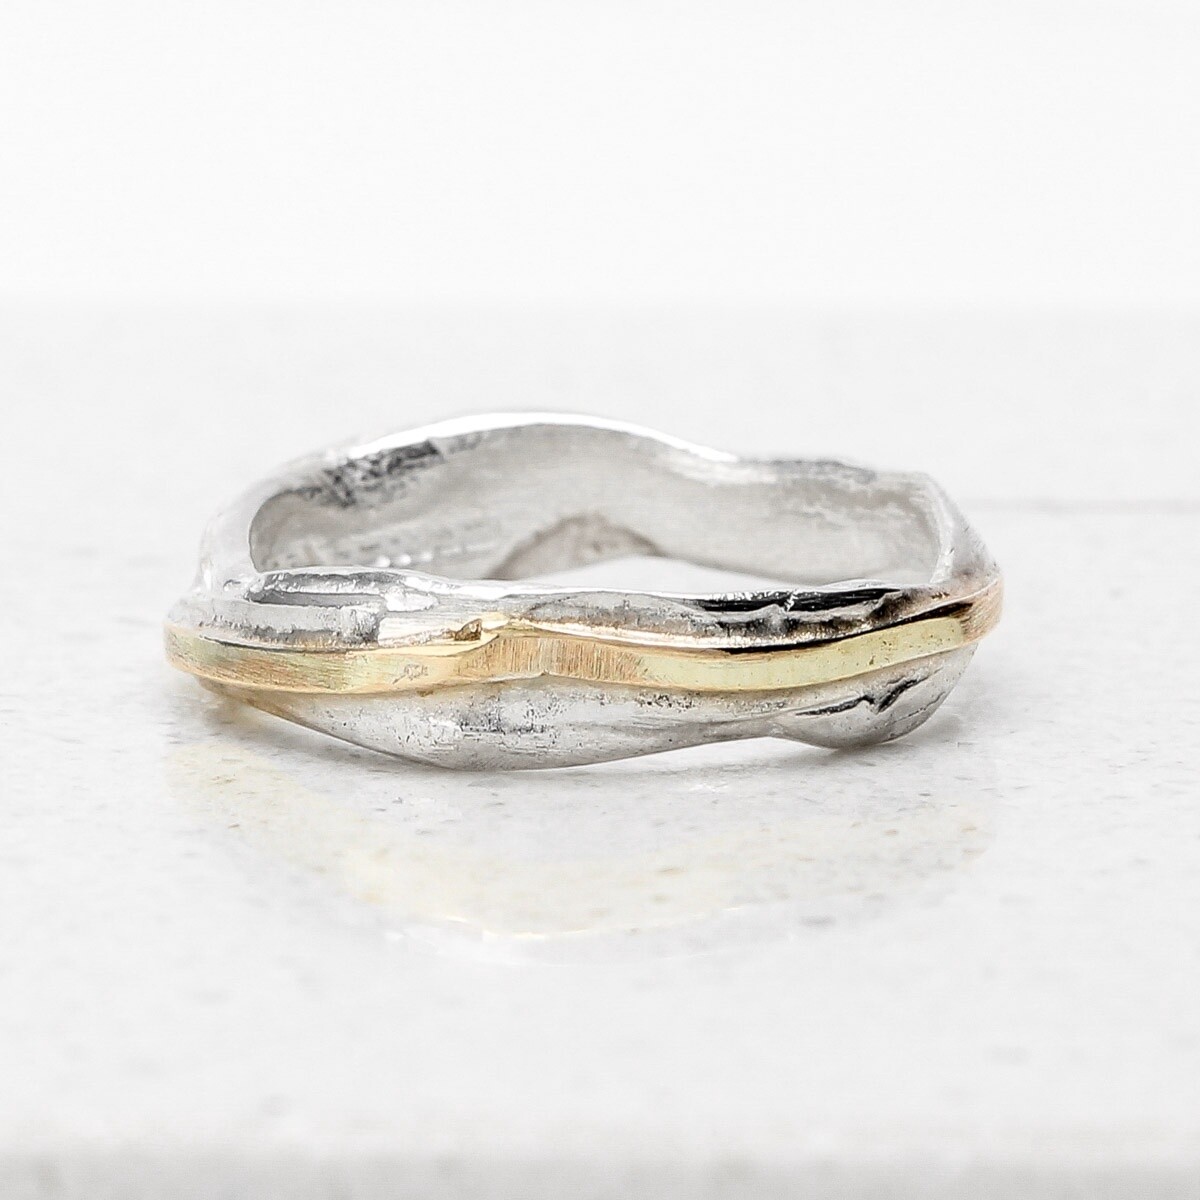 Ribbon Silver Ring - Narrow with Gold Stripe by Fi Mehra